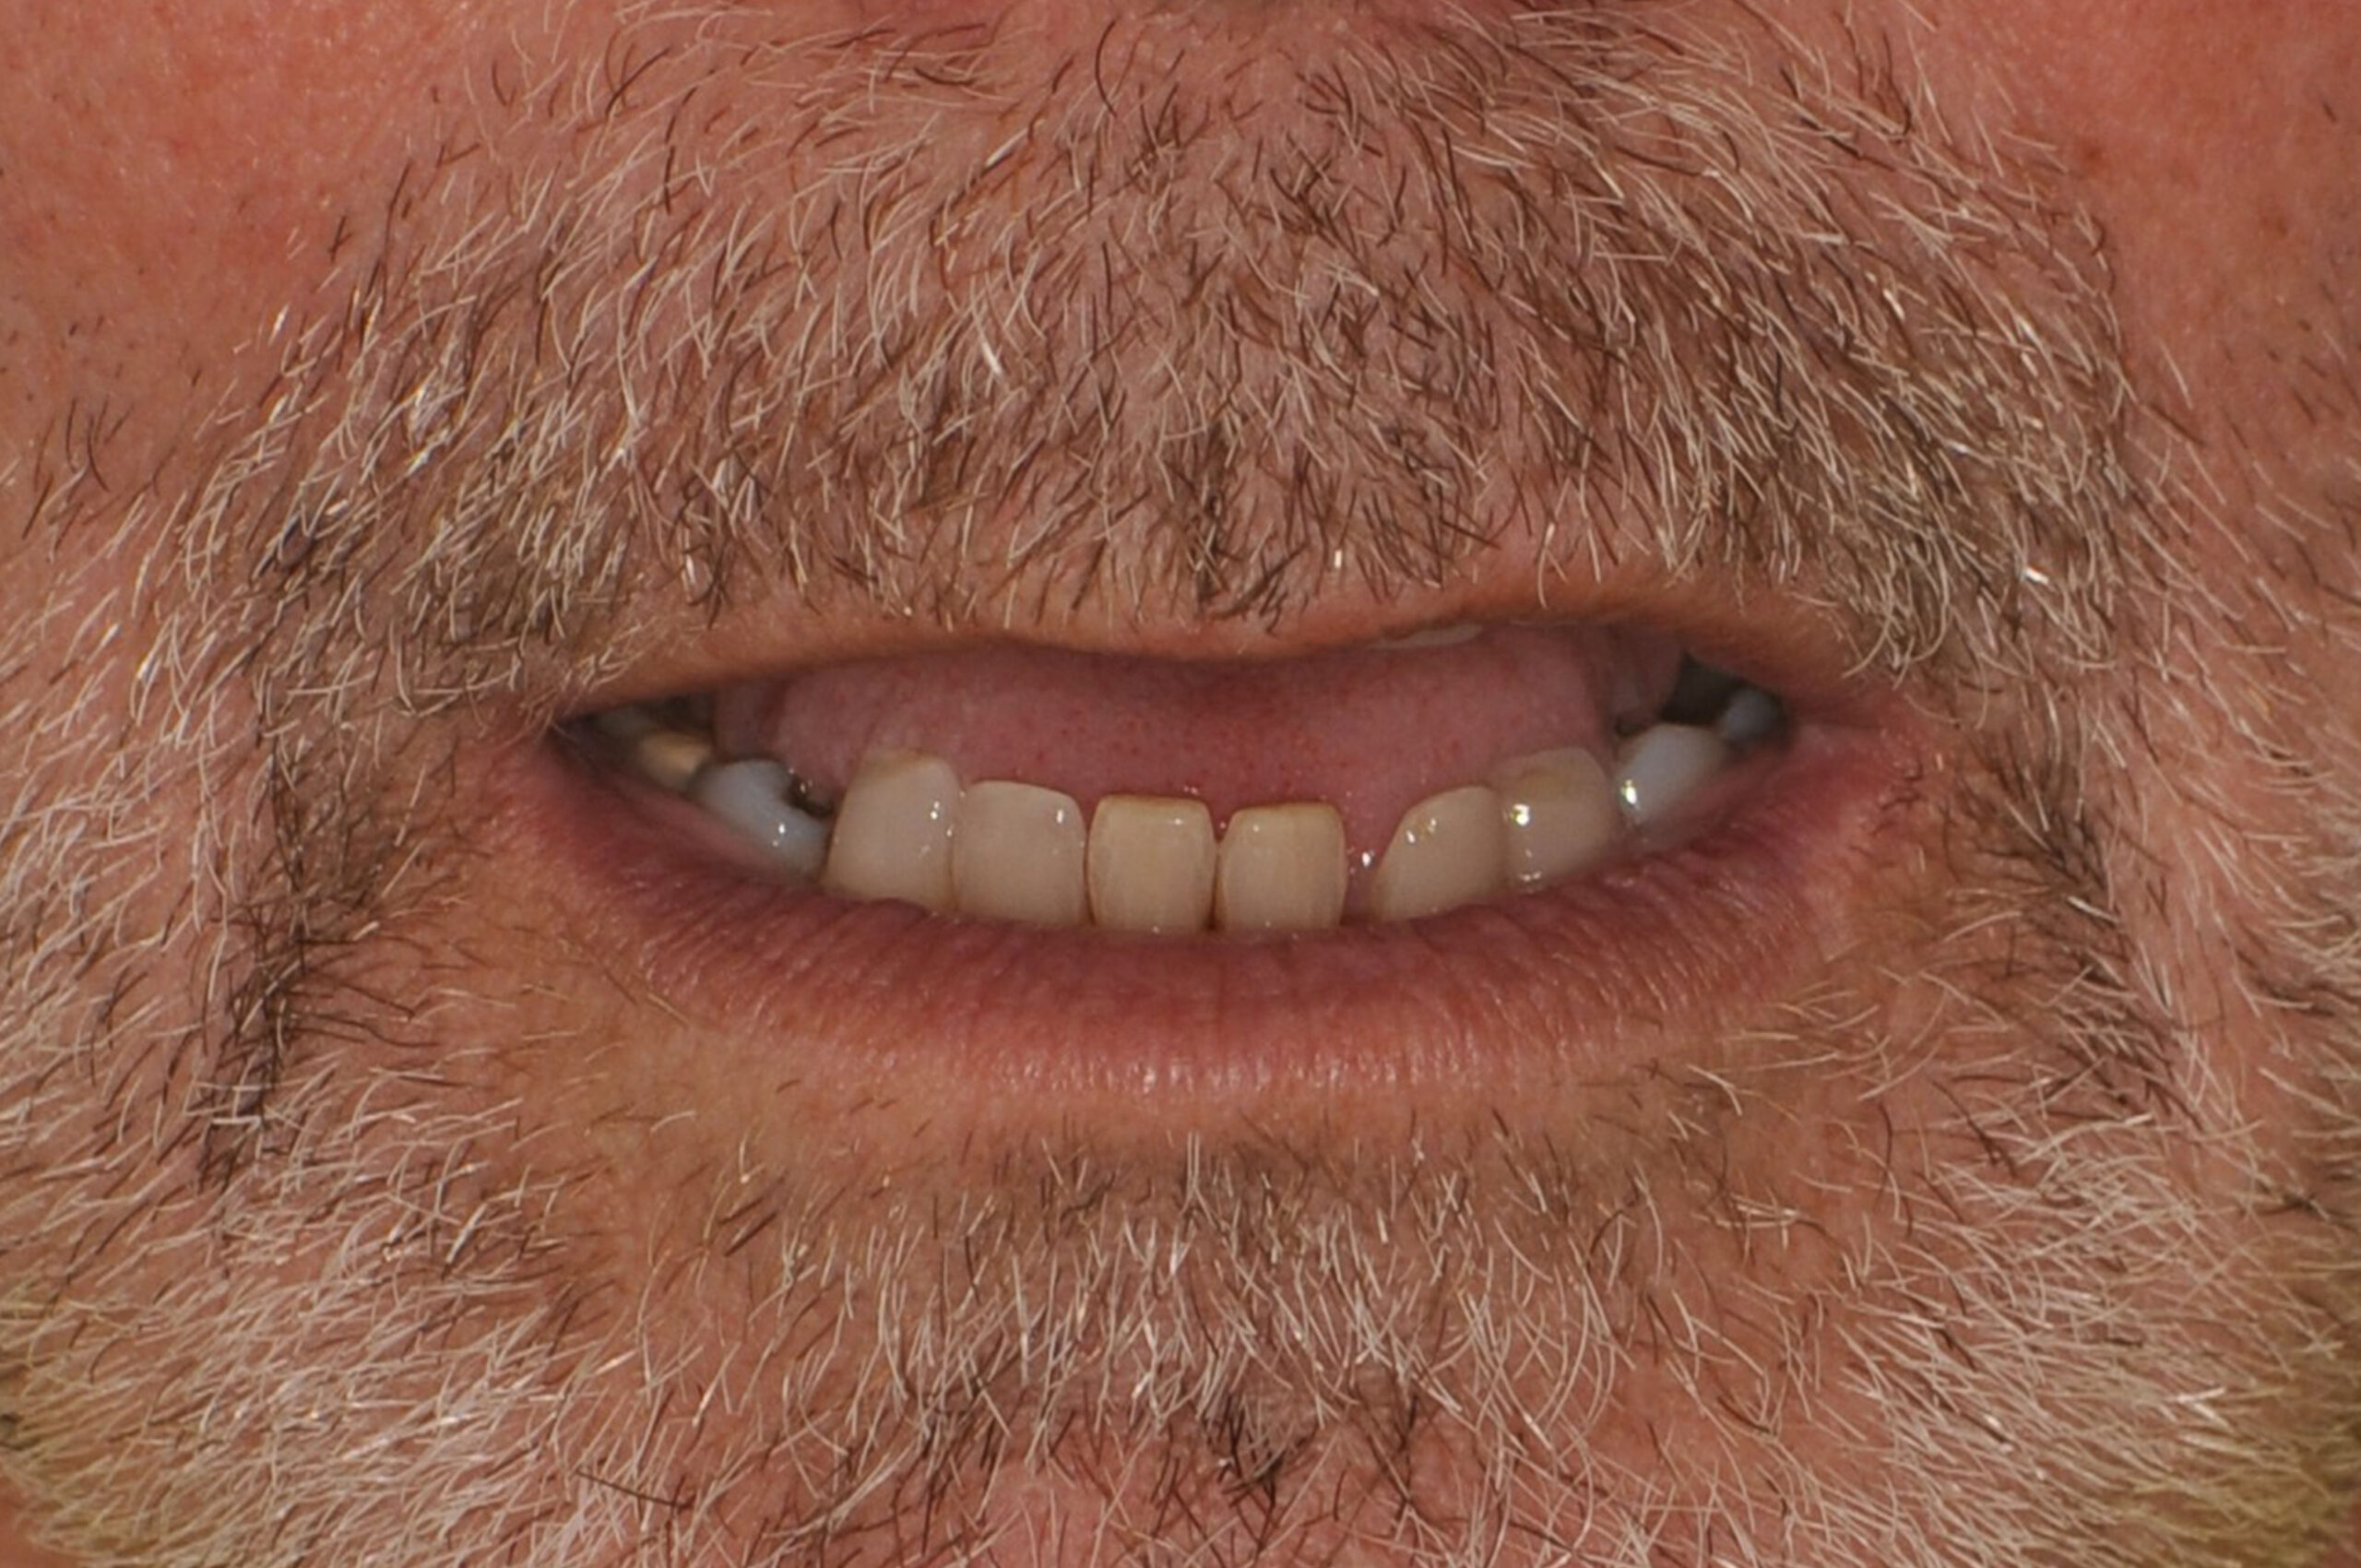 tooth implant surgery for a better smile